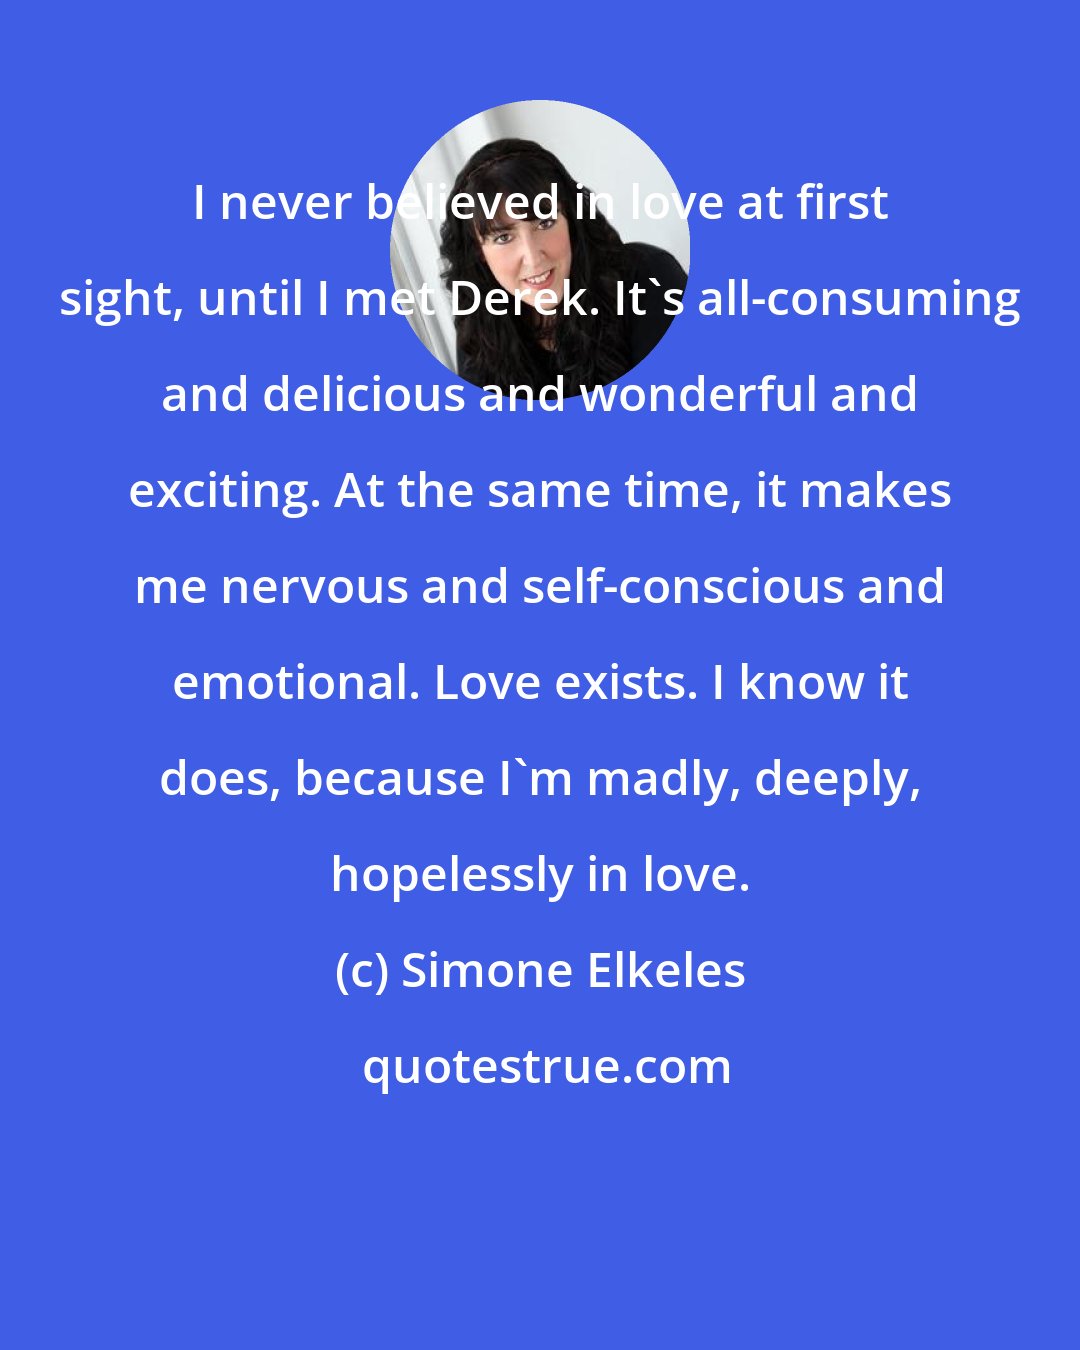 Simone Elkeles: I never believed in love at first sight, until I met Derek. It's all-consuming and delicious and wonderful and exciting. At the same time, it makes me nervous and self-conscious and emotional. Love exists. I know it does, because I'm madly, deeply, hopelessly in love.